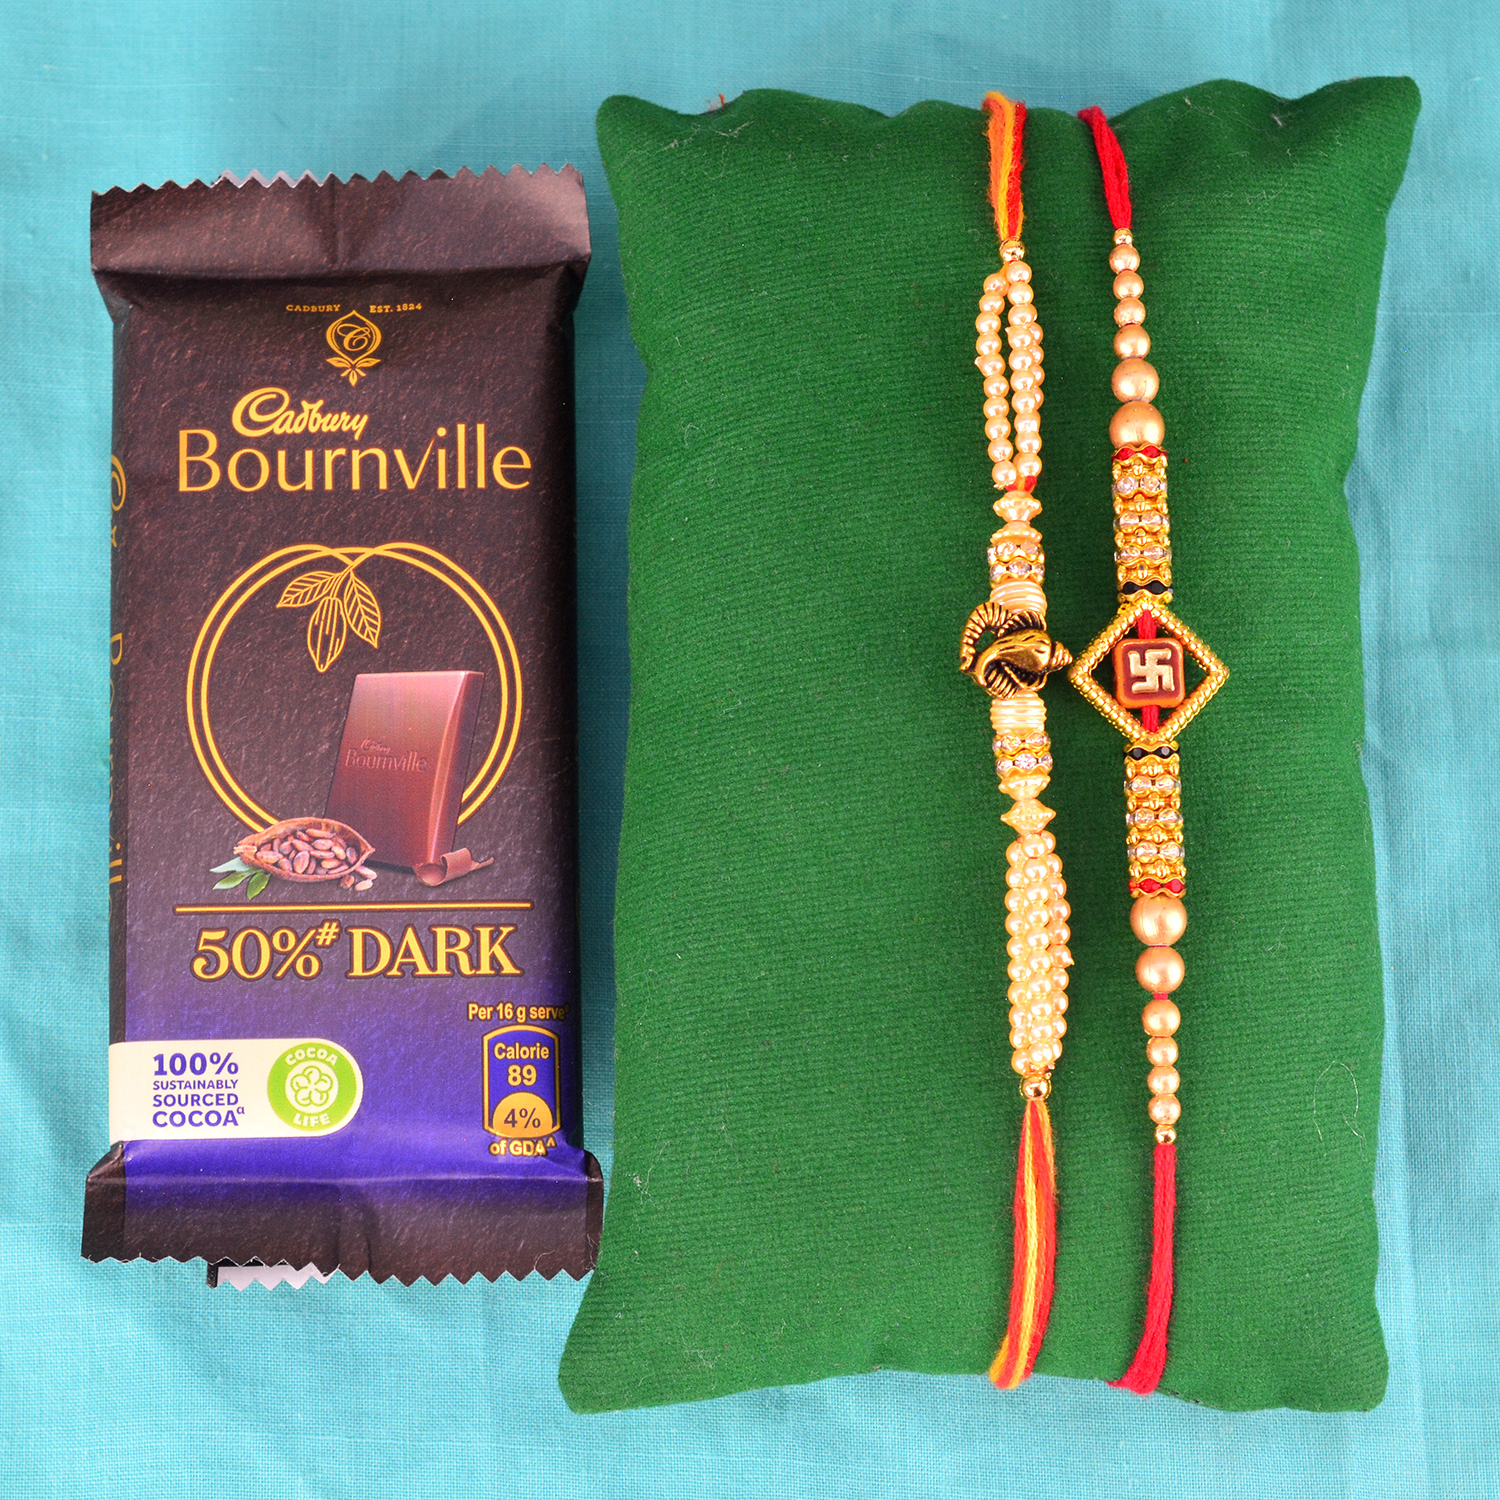 2 Diving Golden Fancy Brother Rakhis with Cadbury Small Bournville Chocolate